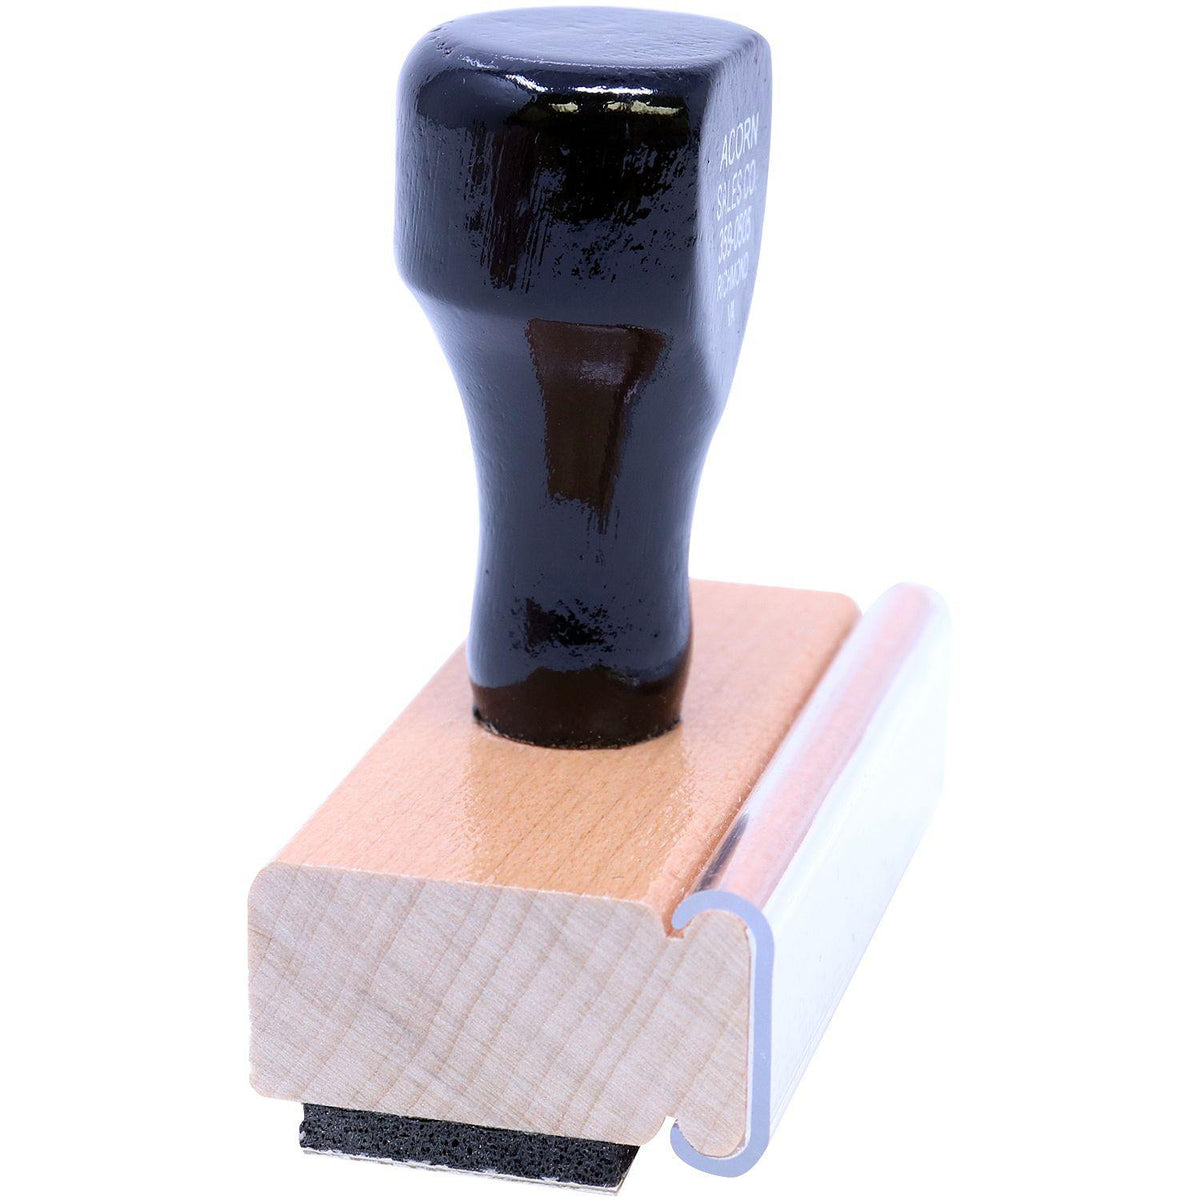 Medi Cal Rubber Stamp - Engineer Seal Stamps - Brand_Acorn, Impression Size_Small, Stamp Type_Regular Stamp, Type of Use_Medical Office